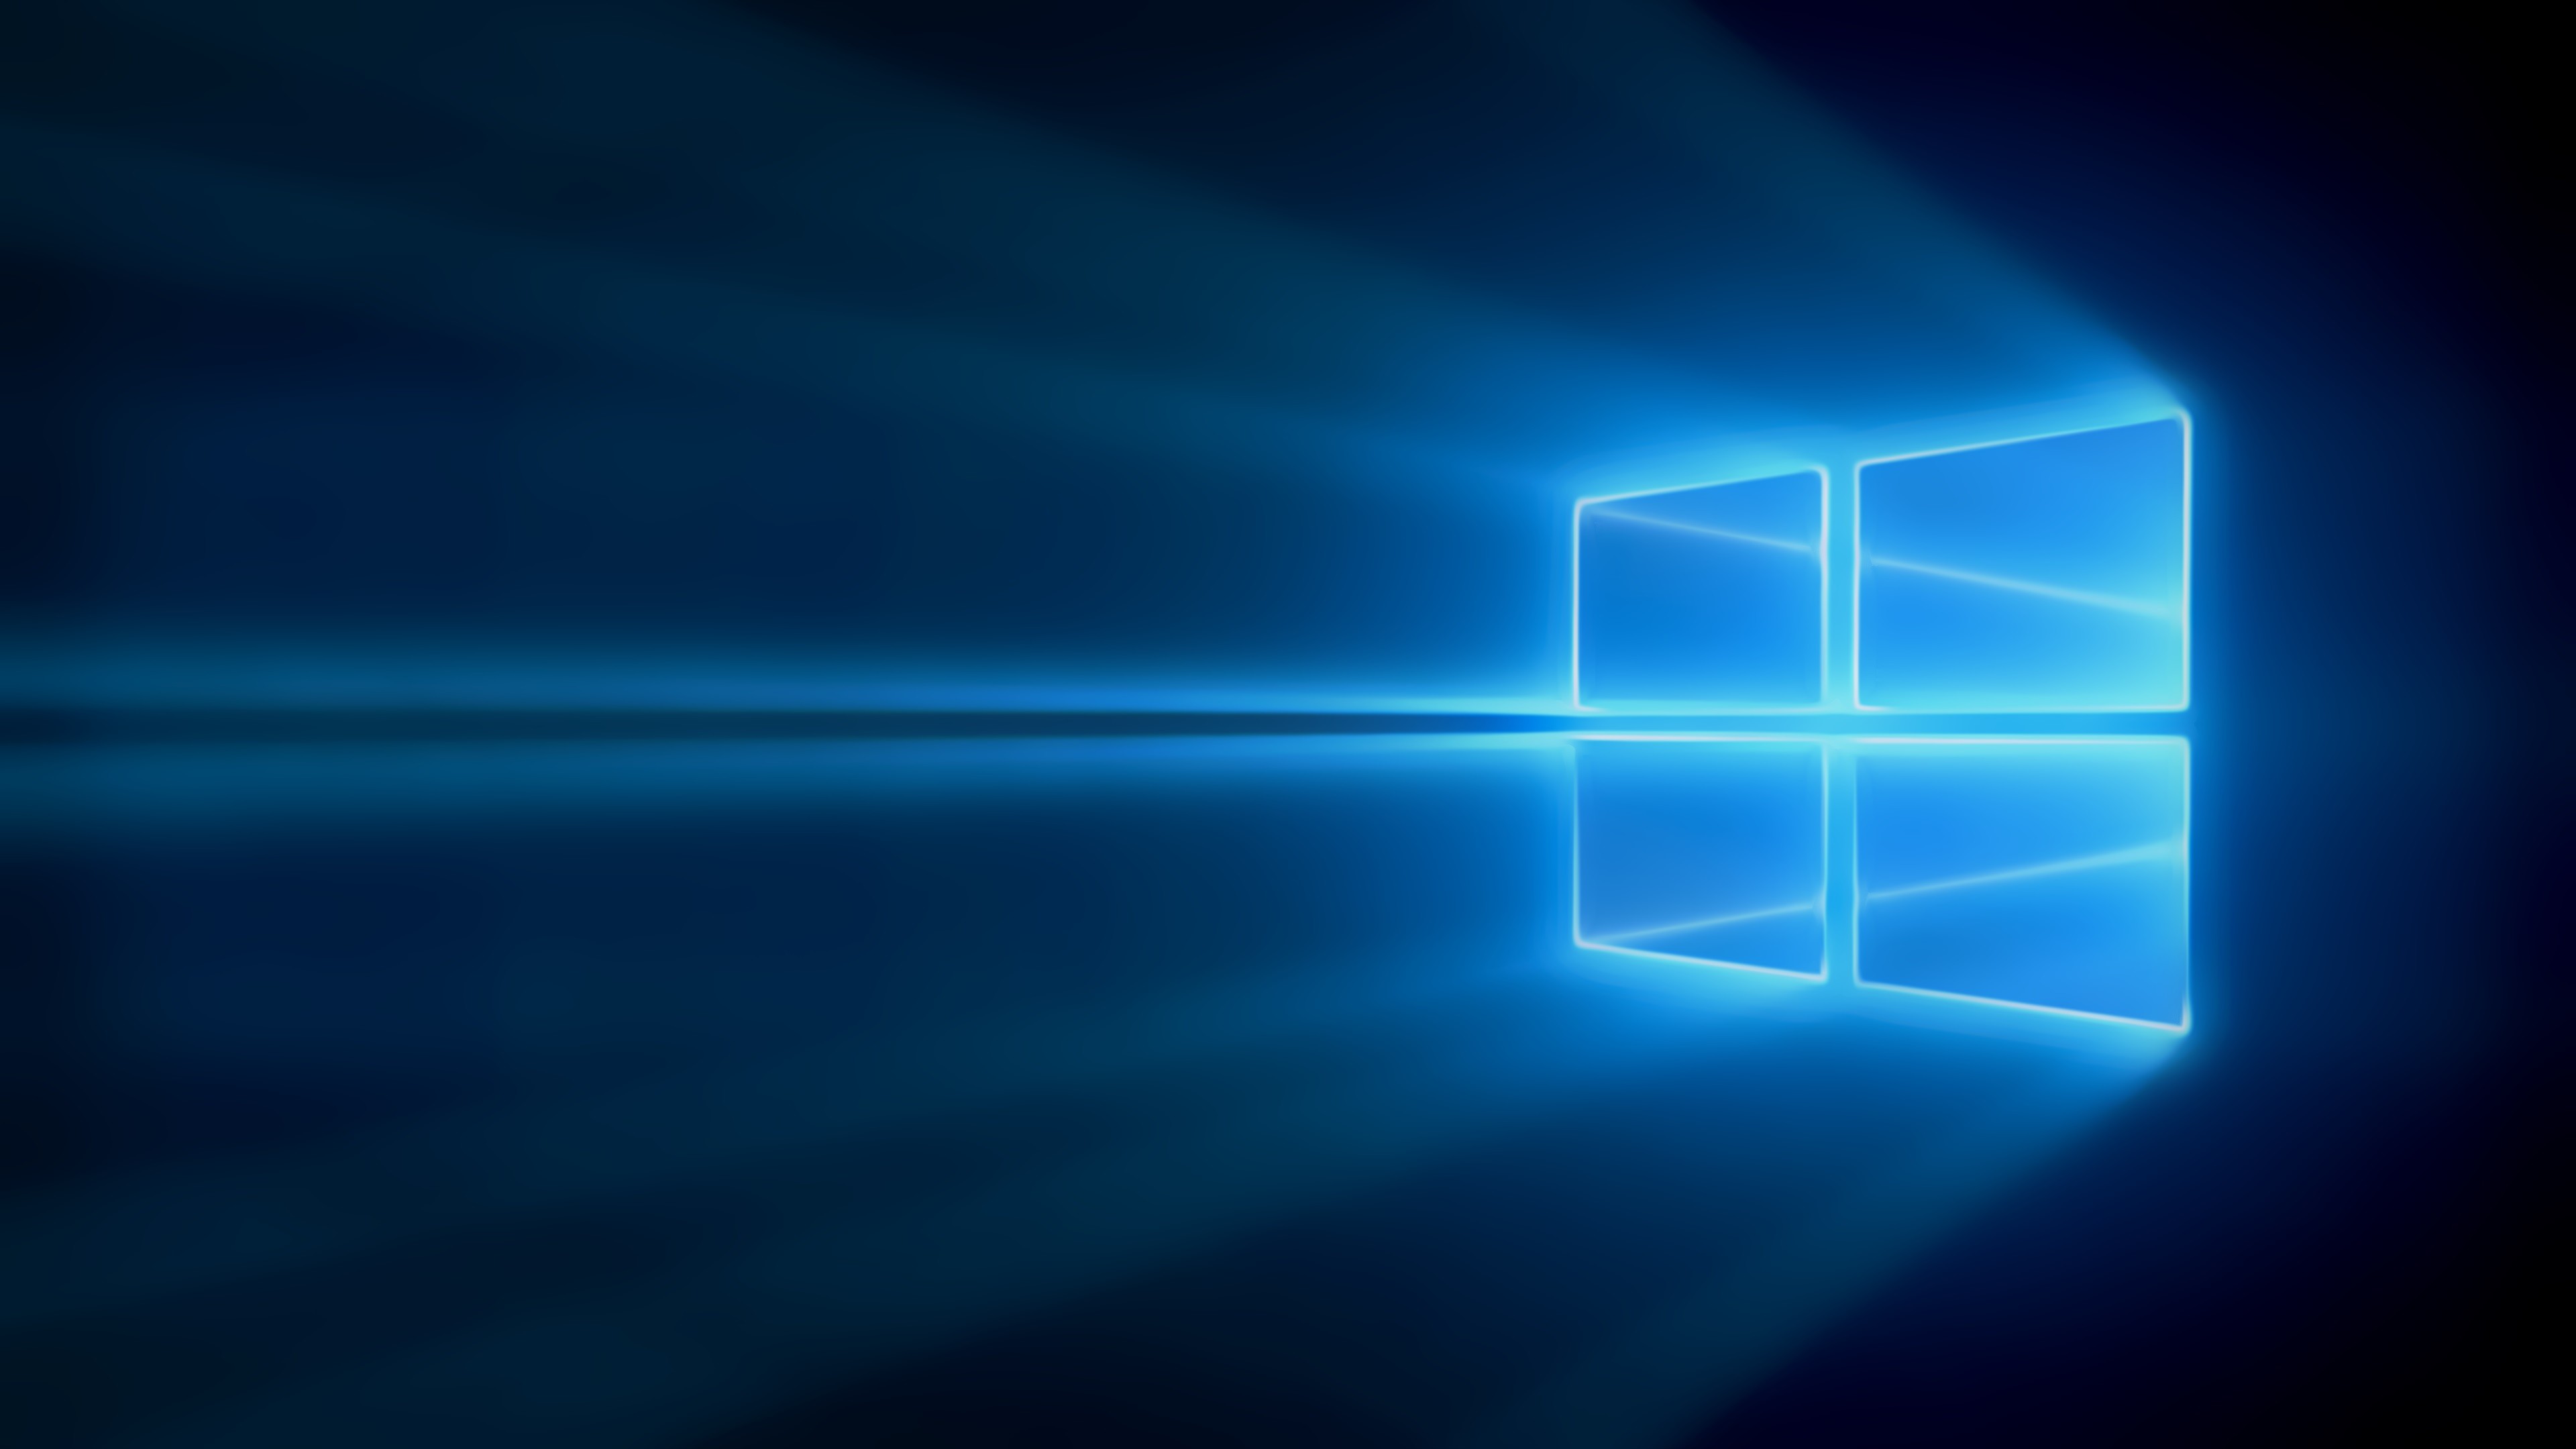  Effects Master Creates Downloadable Version of Windows 10 Wallpaper 3840x2160